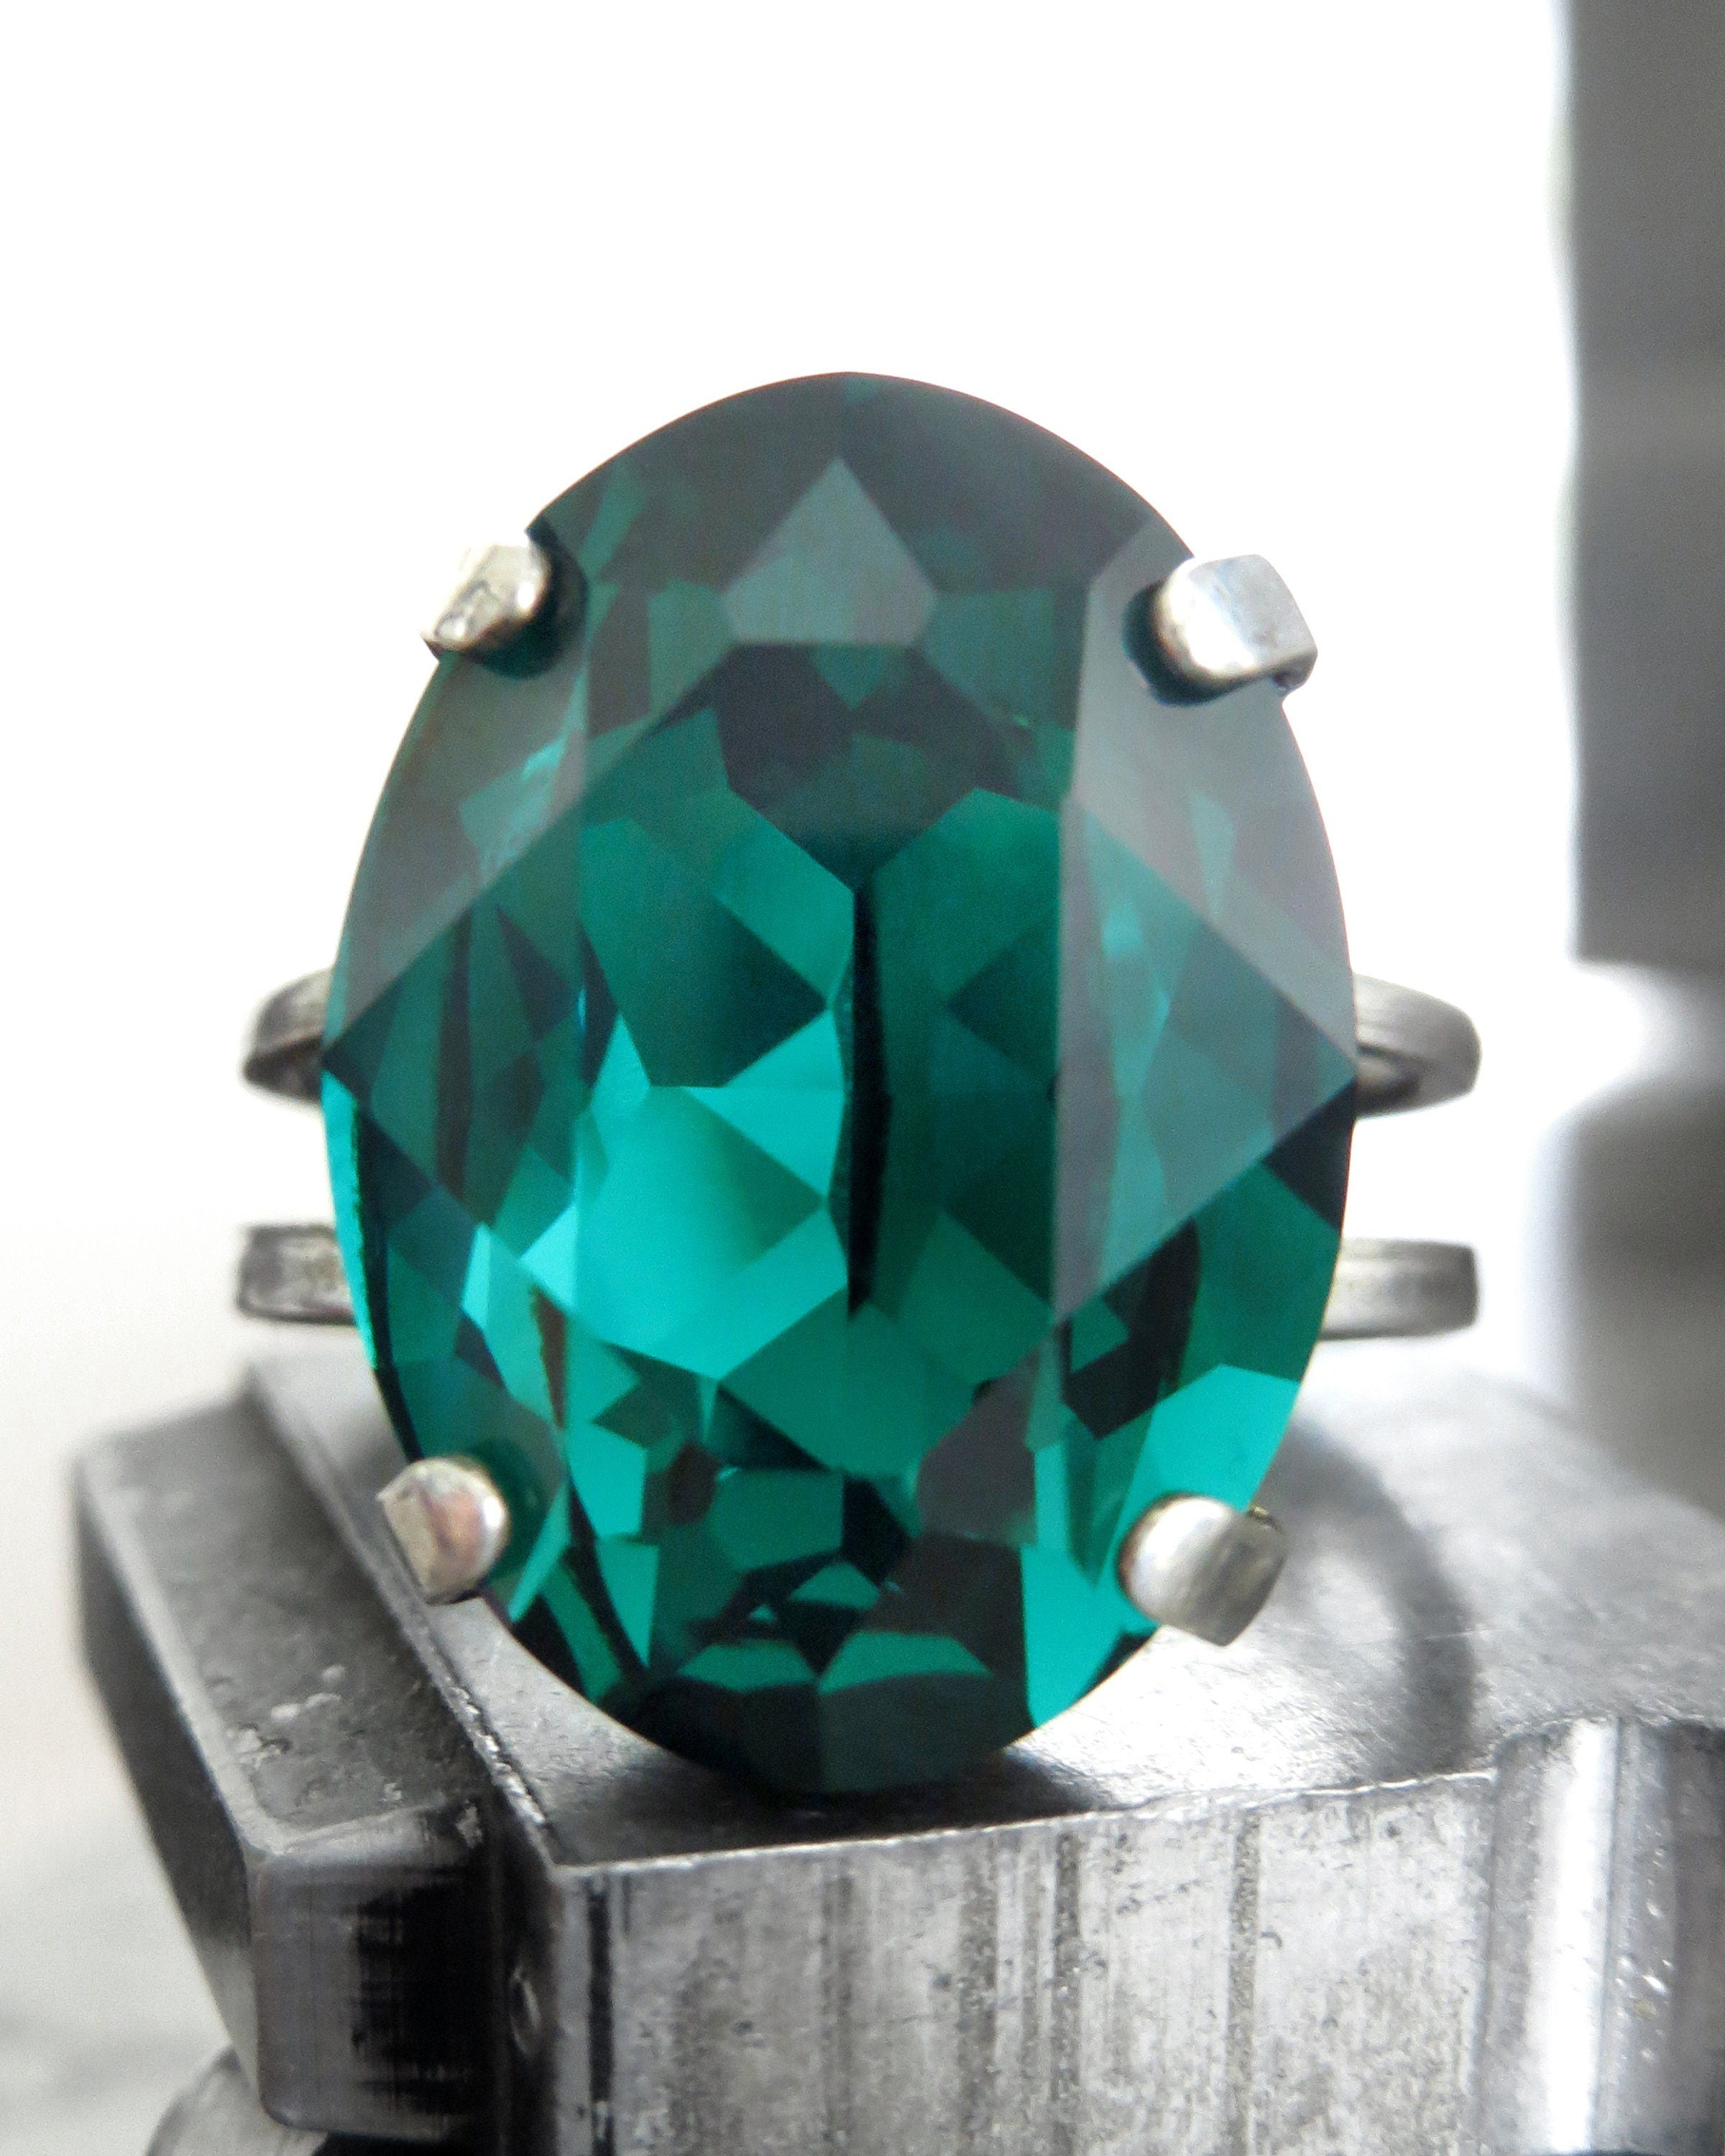 CROWN JEWEL: Emerald Green Crystal Ring, Oval Emerald Crystal Ring with Antiqued Silver Adjustable Band, May Birthstone Ring - 4120